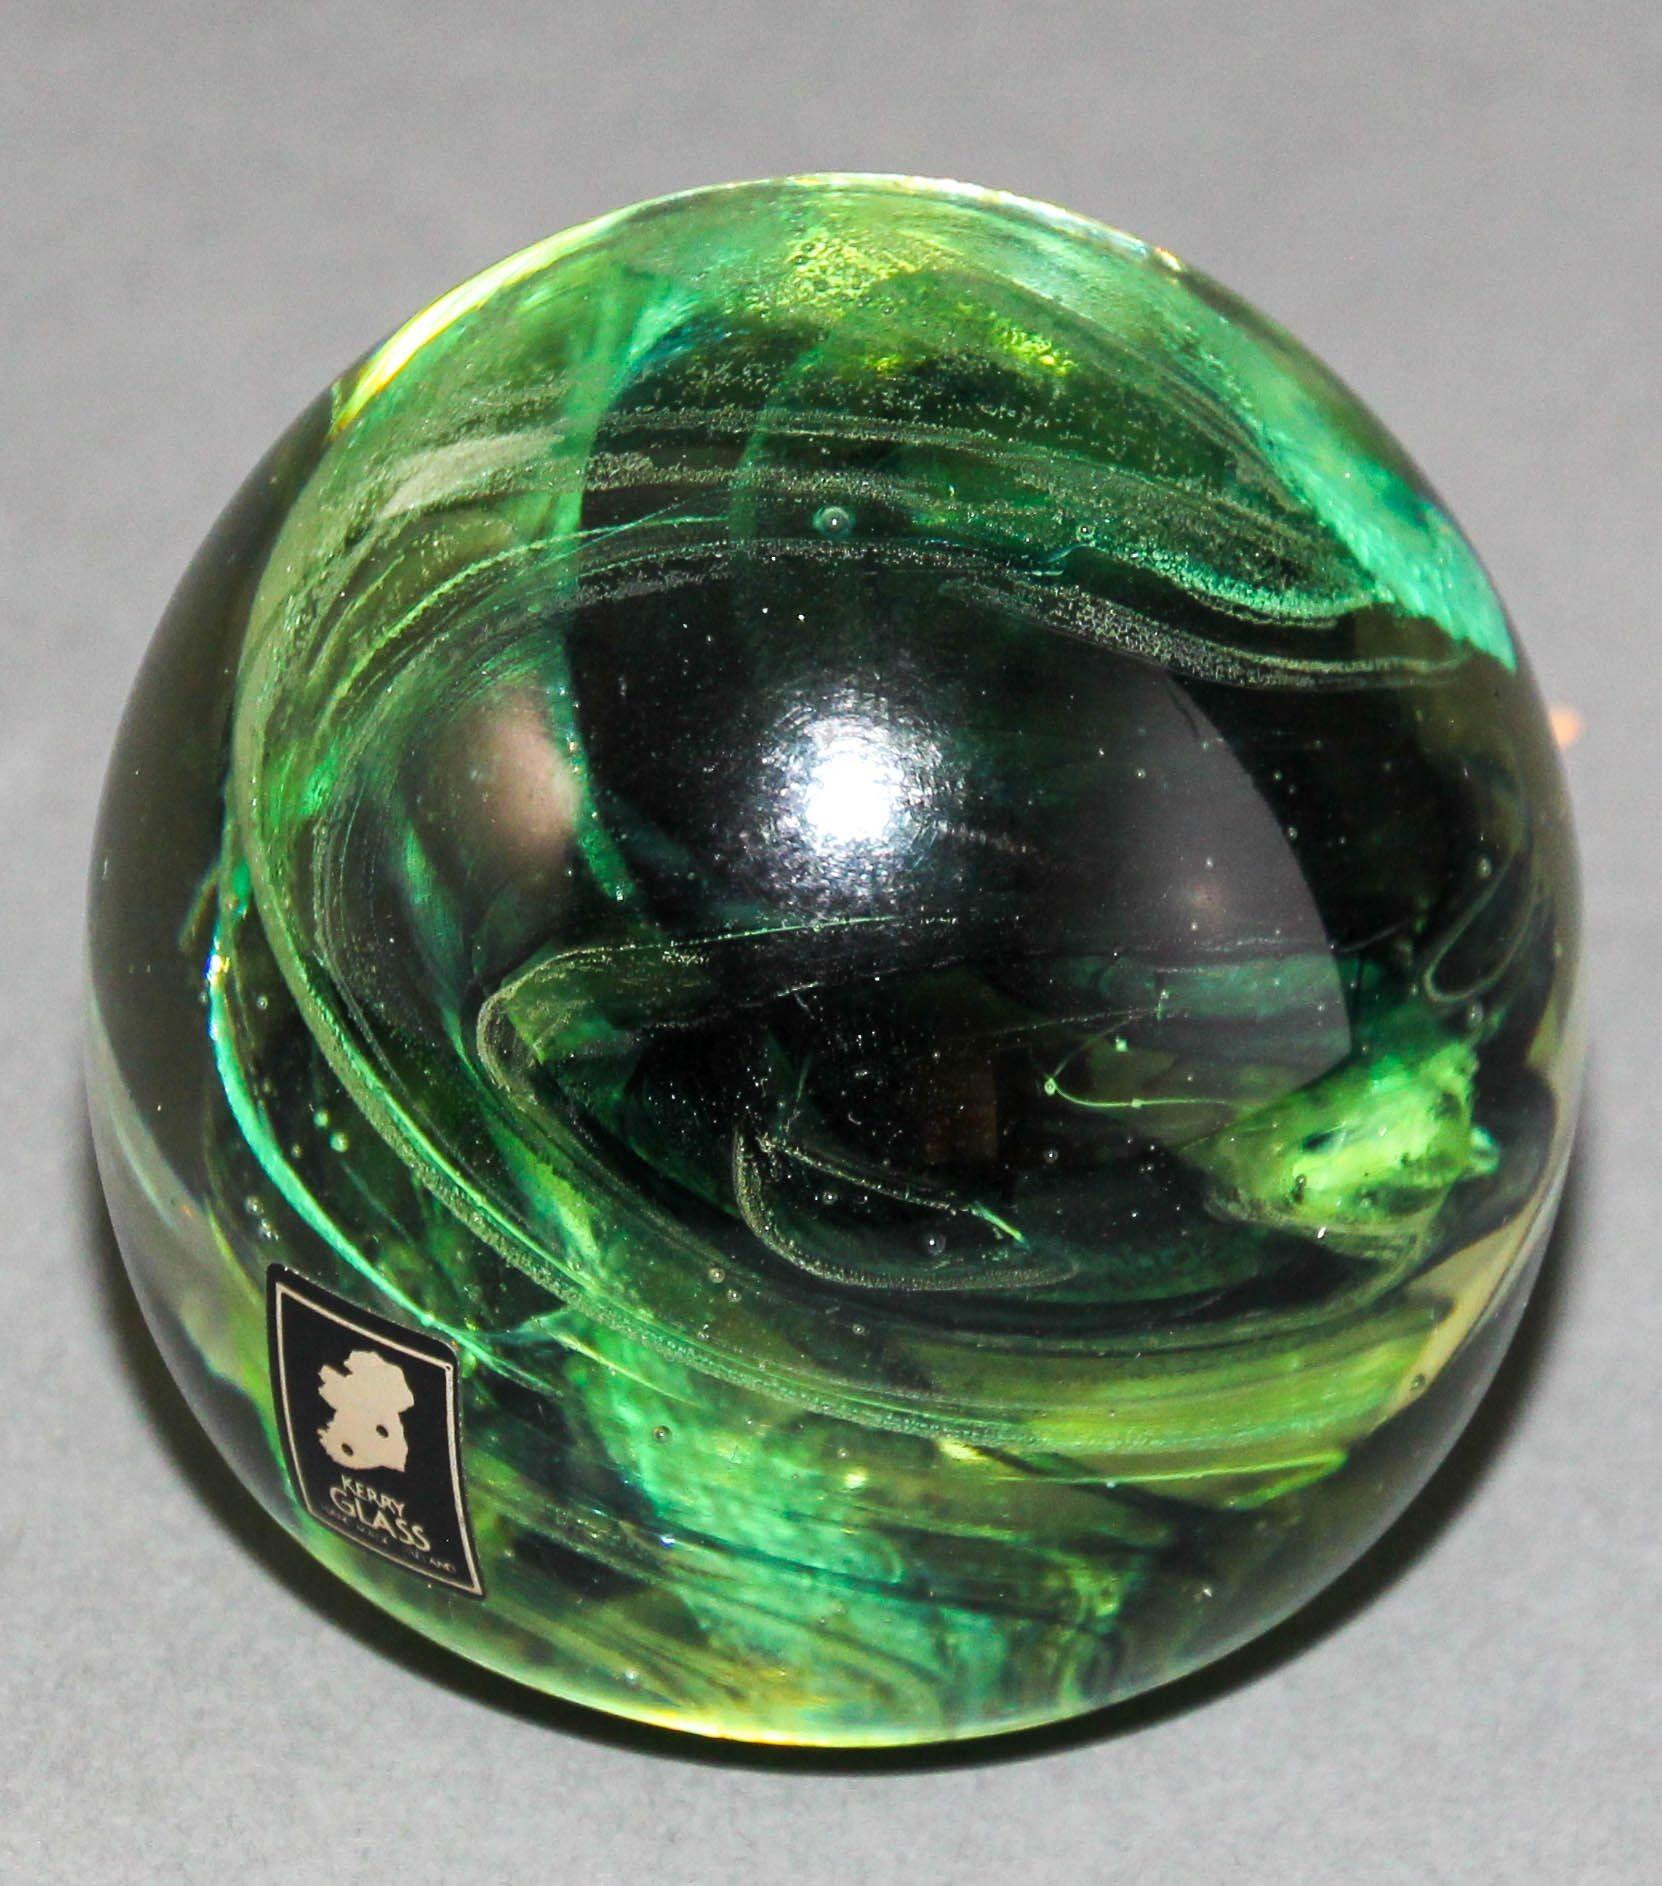 KERRY Irish Art Glass Paperweight Hand Blown in a Jade to Emerald Green 1980s For Sale 6